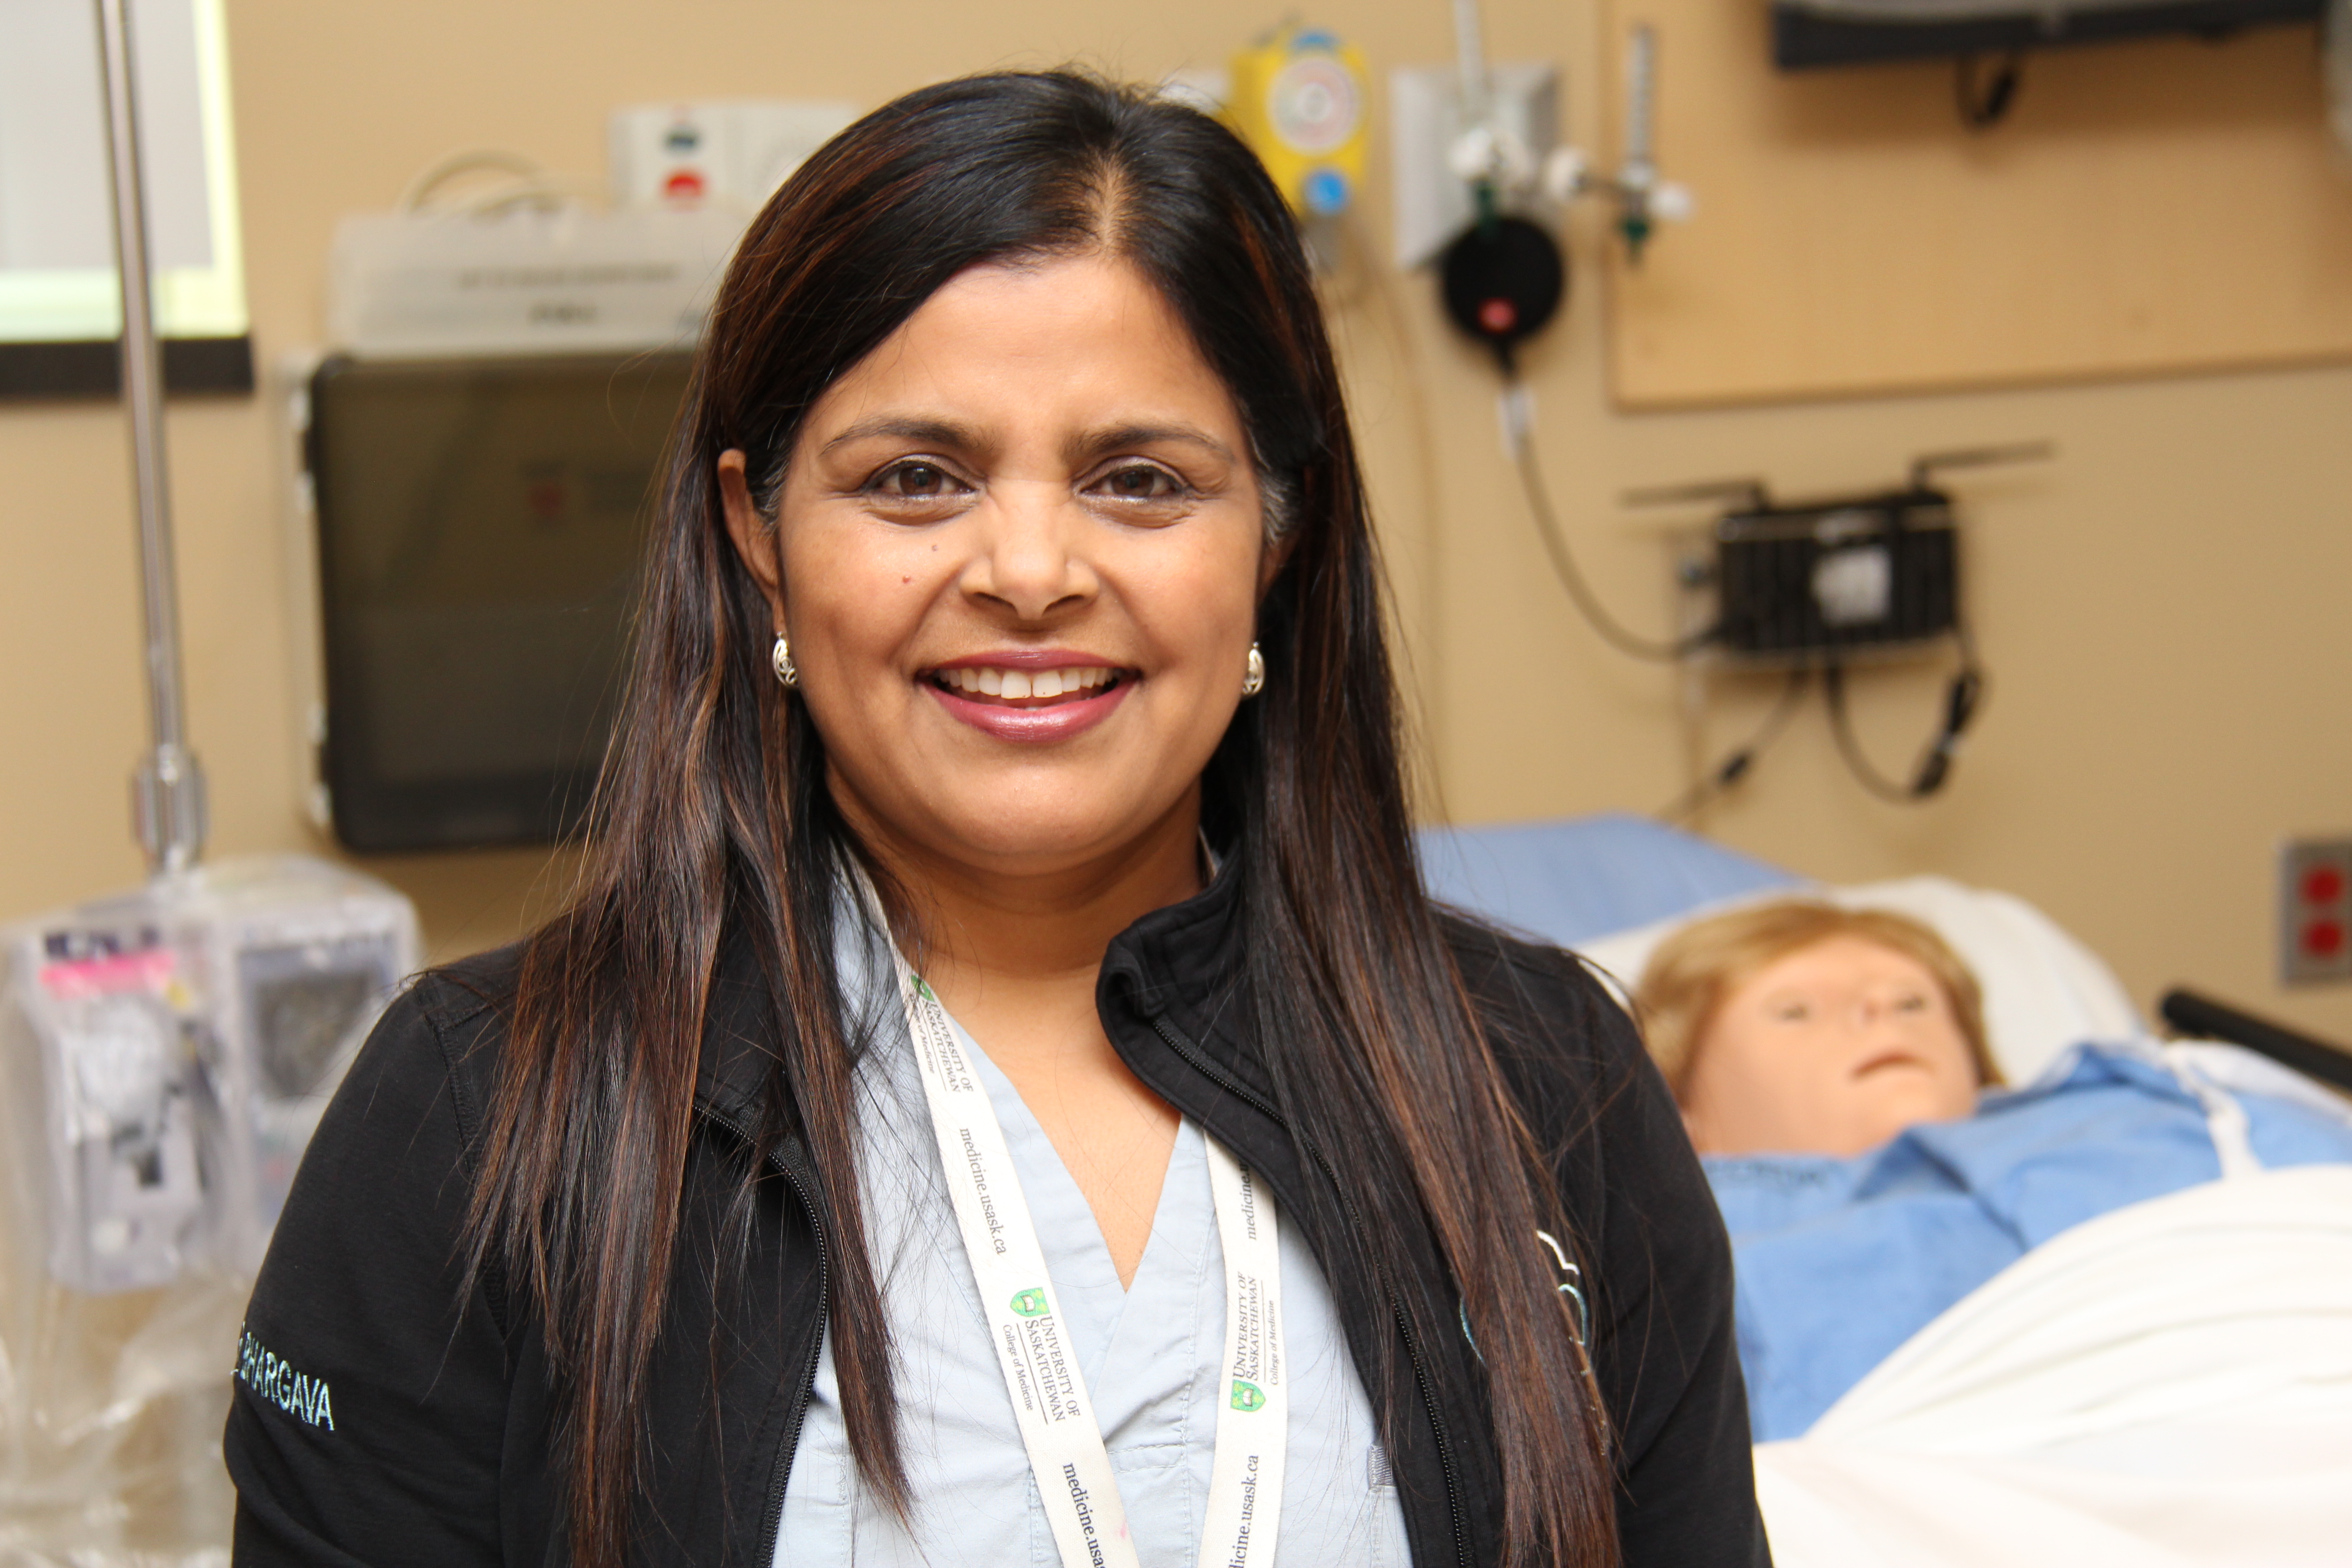 Dr. Rashmi Bhargava (MD'91) gets to experience the best of medicine and education as the Year 2 Clinical Skills site lead and the Year 3 Clerkship Coordinator at the USask campus in Regina. She oversees students as they take objective structured clinical examinations (OSCE) in the Dilawri Simulation Centre located at the Regina General Hospital.  